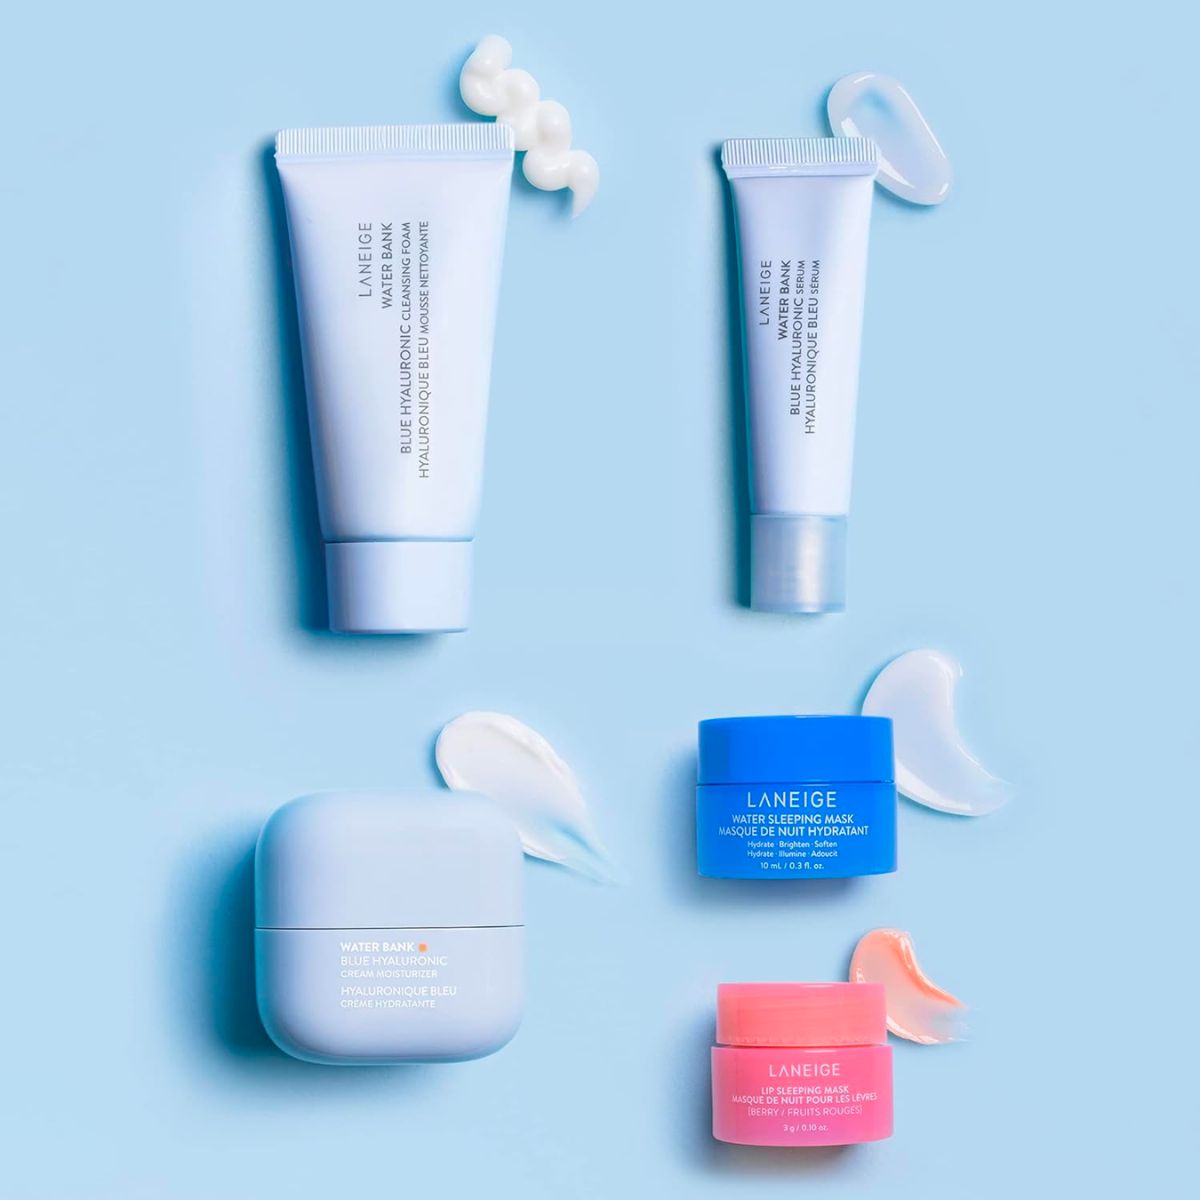 laneige besties kit products swatched